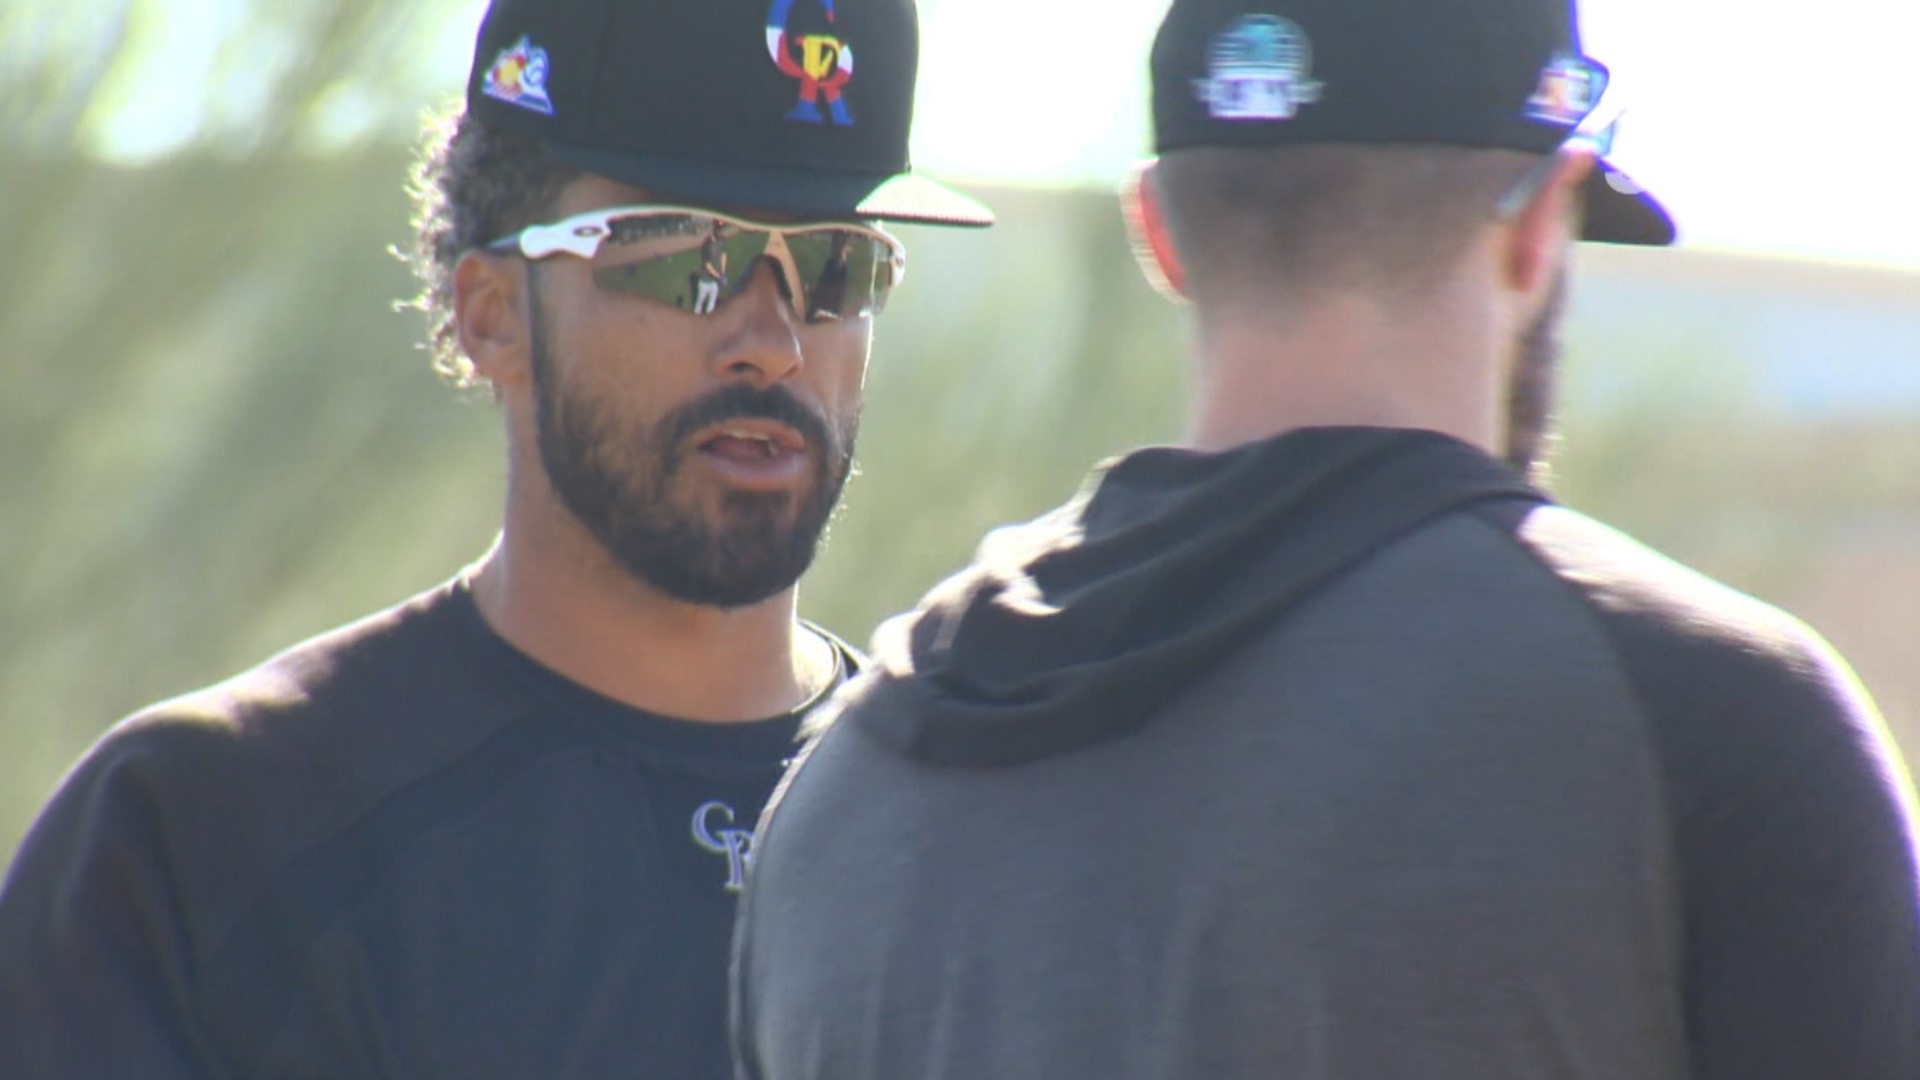 The Rockies outfielder said at spring training that he's quit chewing after more than a decade.